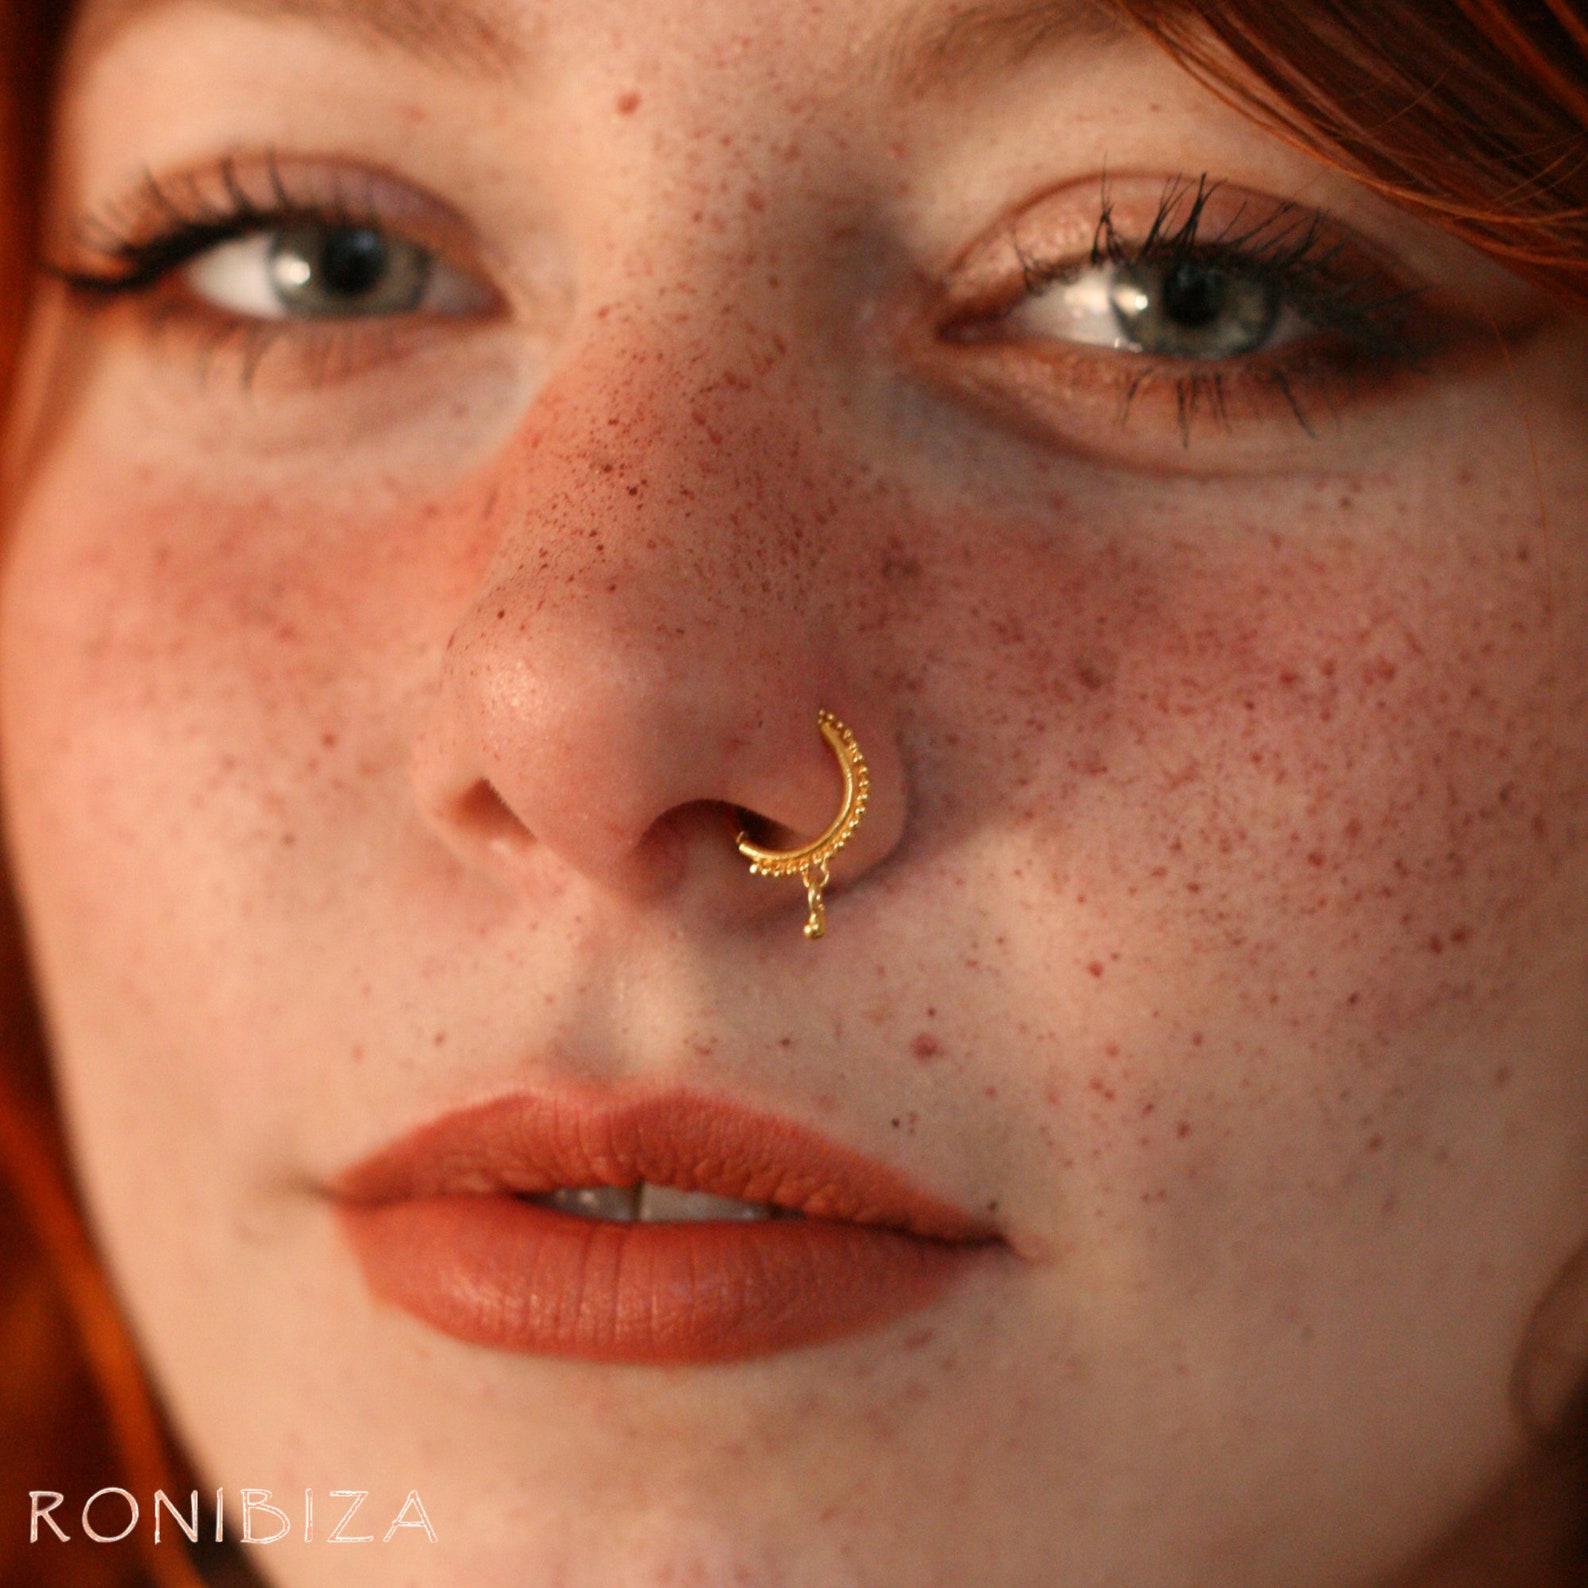 Brunette with Nose Piercing · Free Stock Photo